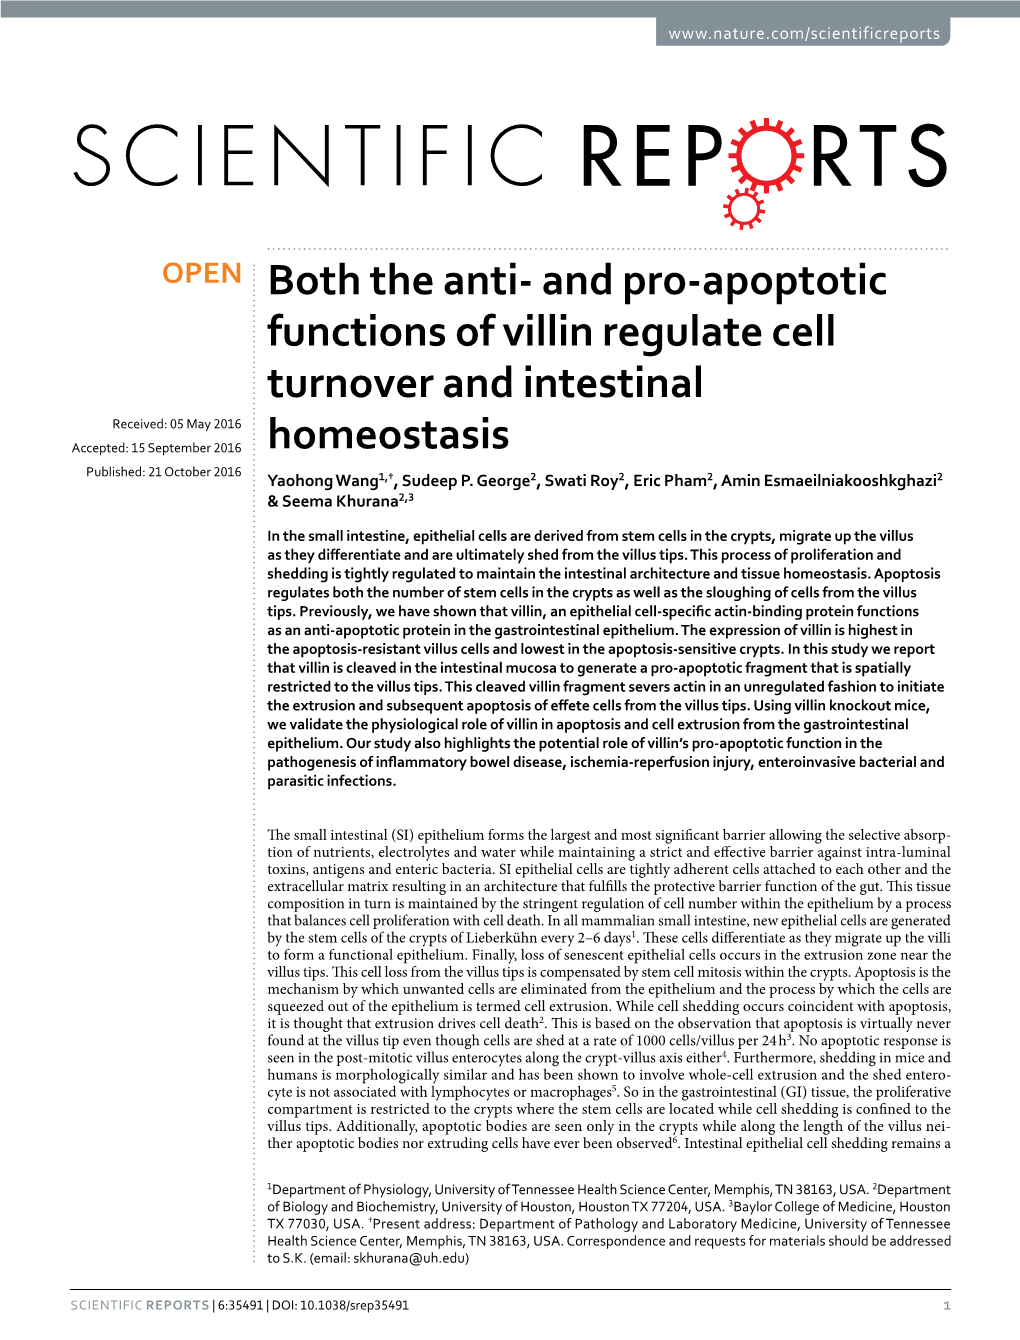 And Pro-Apoptotic Functions of Villin Regulate Cell Turnover and Intestinal